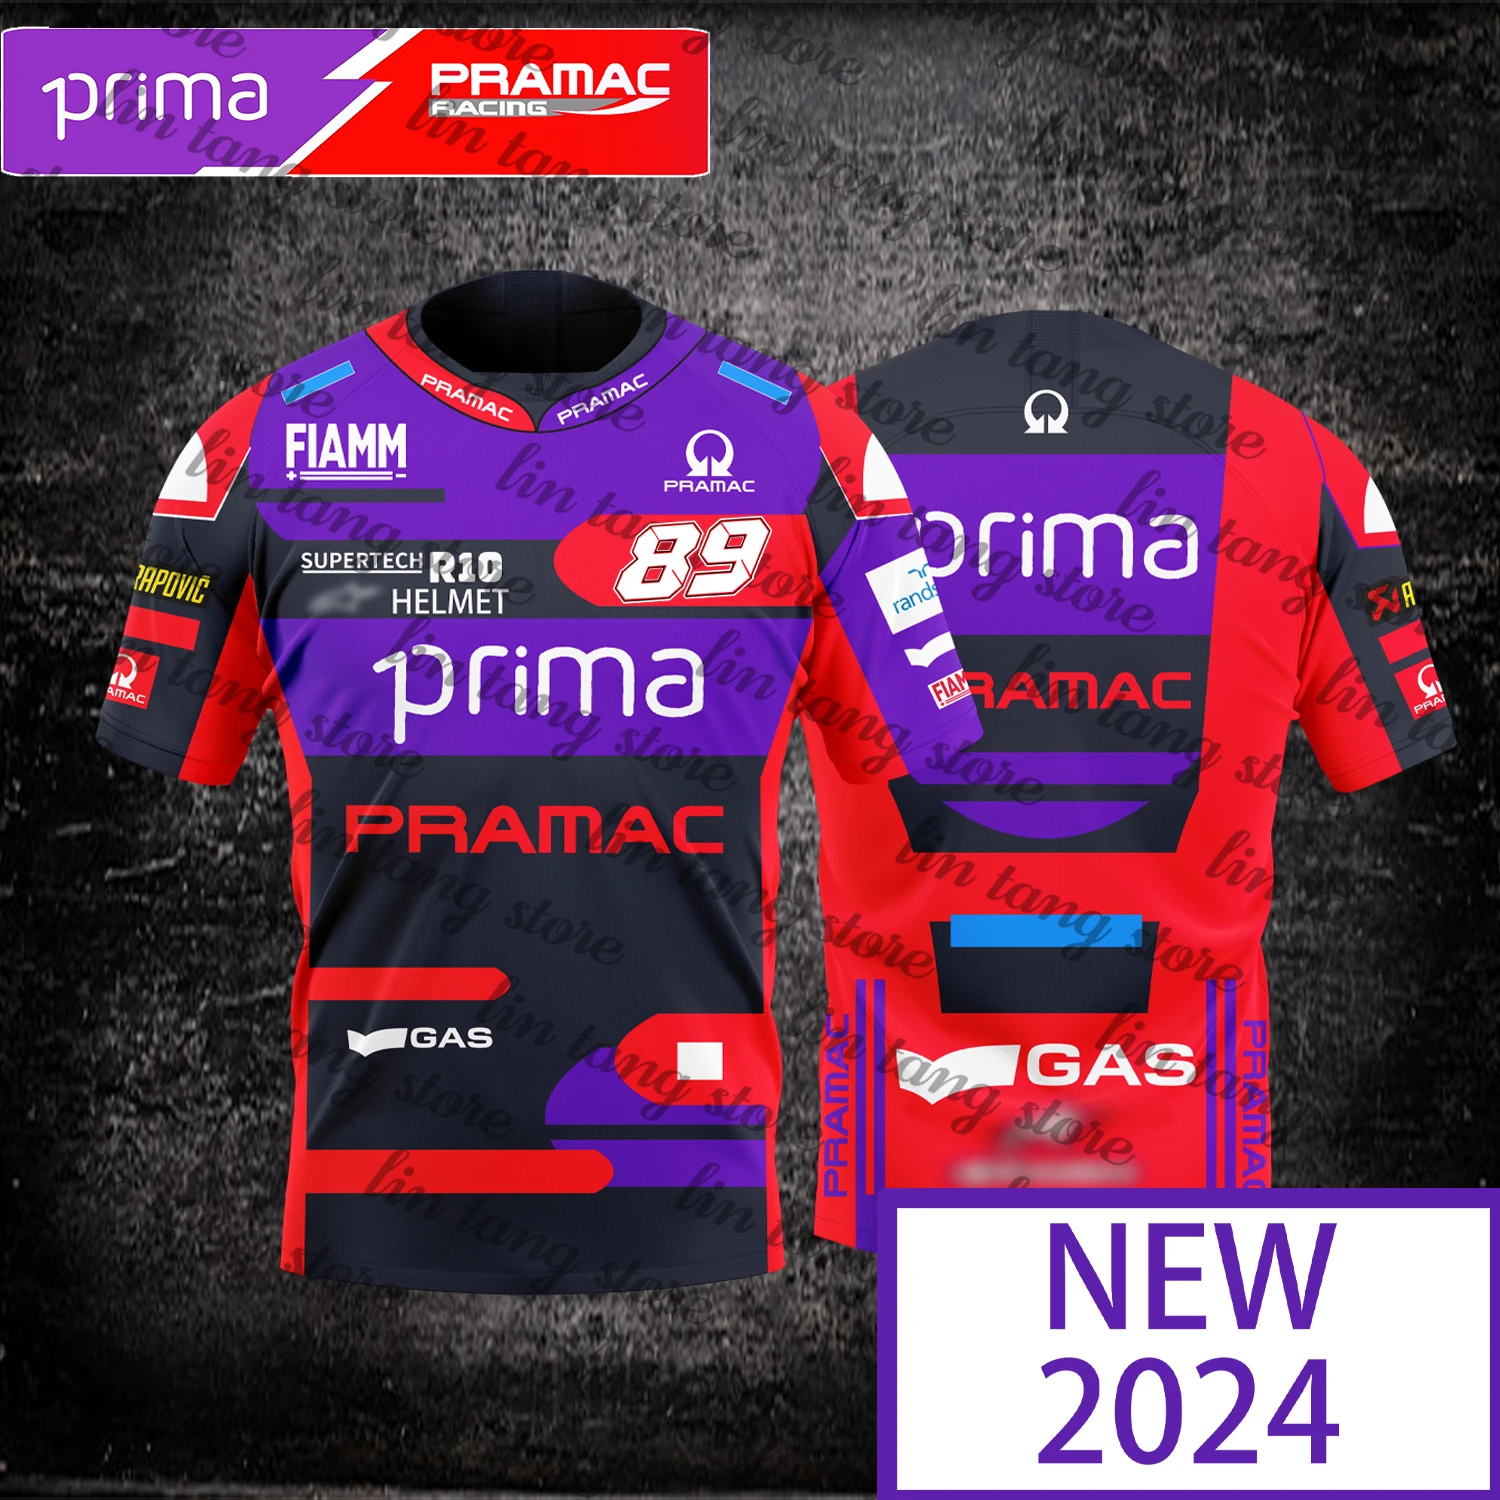 

2024 New Fashion Men's Motorcycle Racing Competition Pramark 89 Racer Purple Prima Sports Quick Dry T-shirt